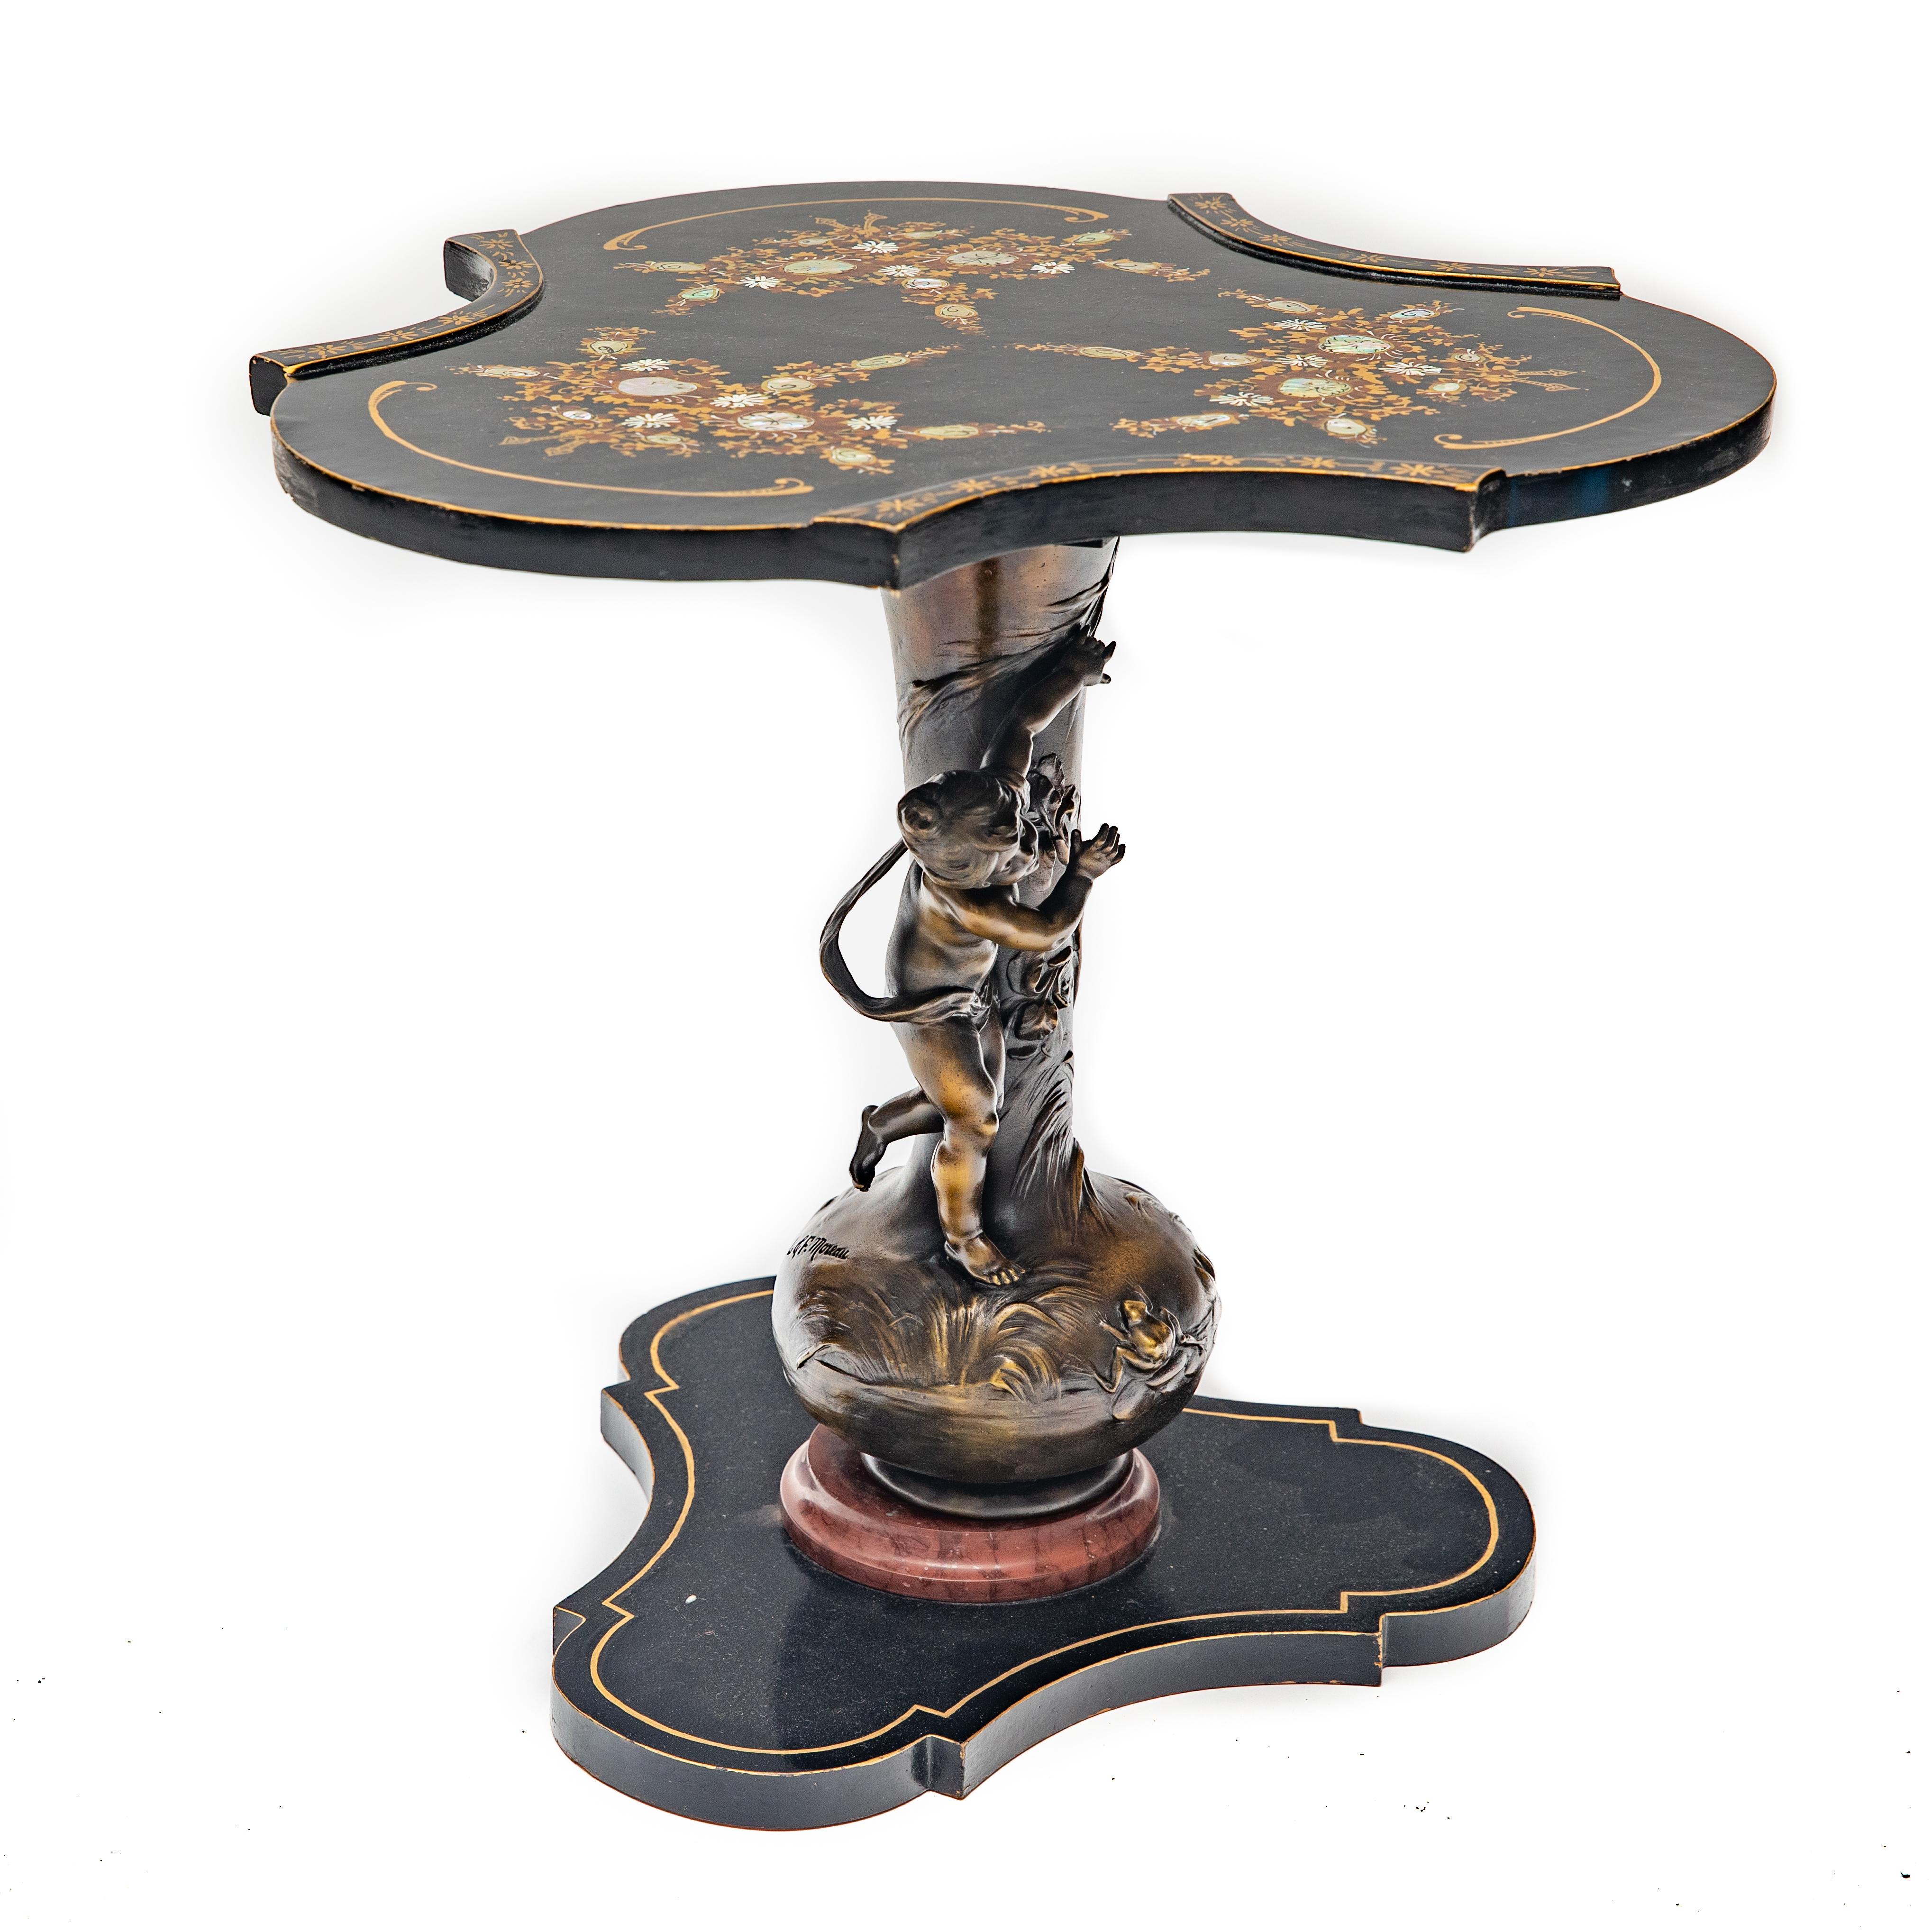 20th Century Pair of L&F Moreau Signed Art Nouveau Bronze Based Occasional Tables